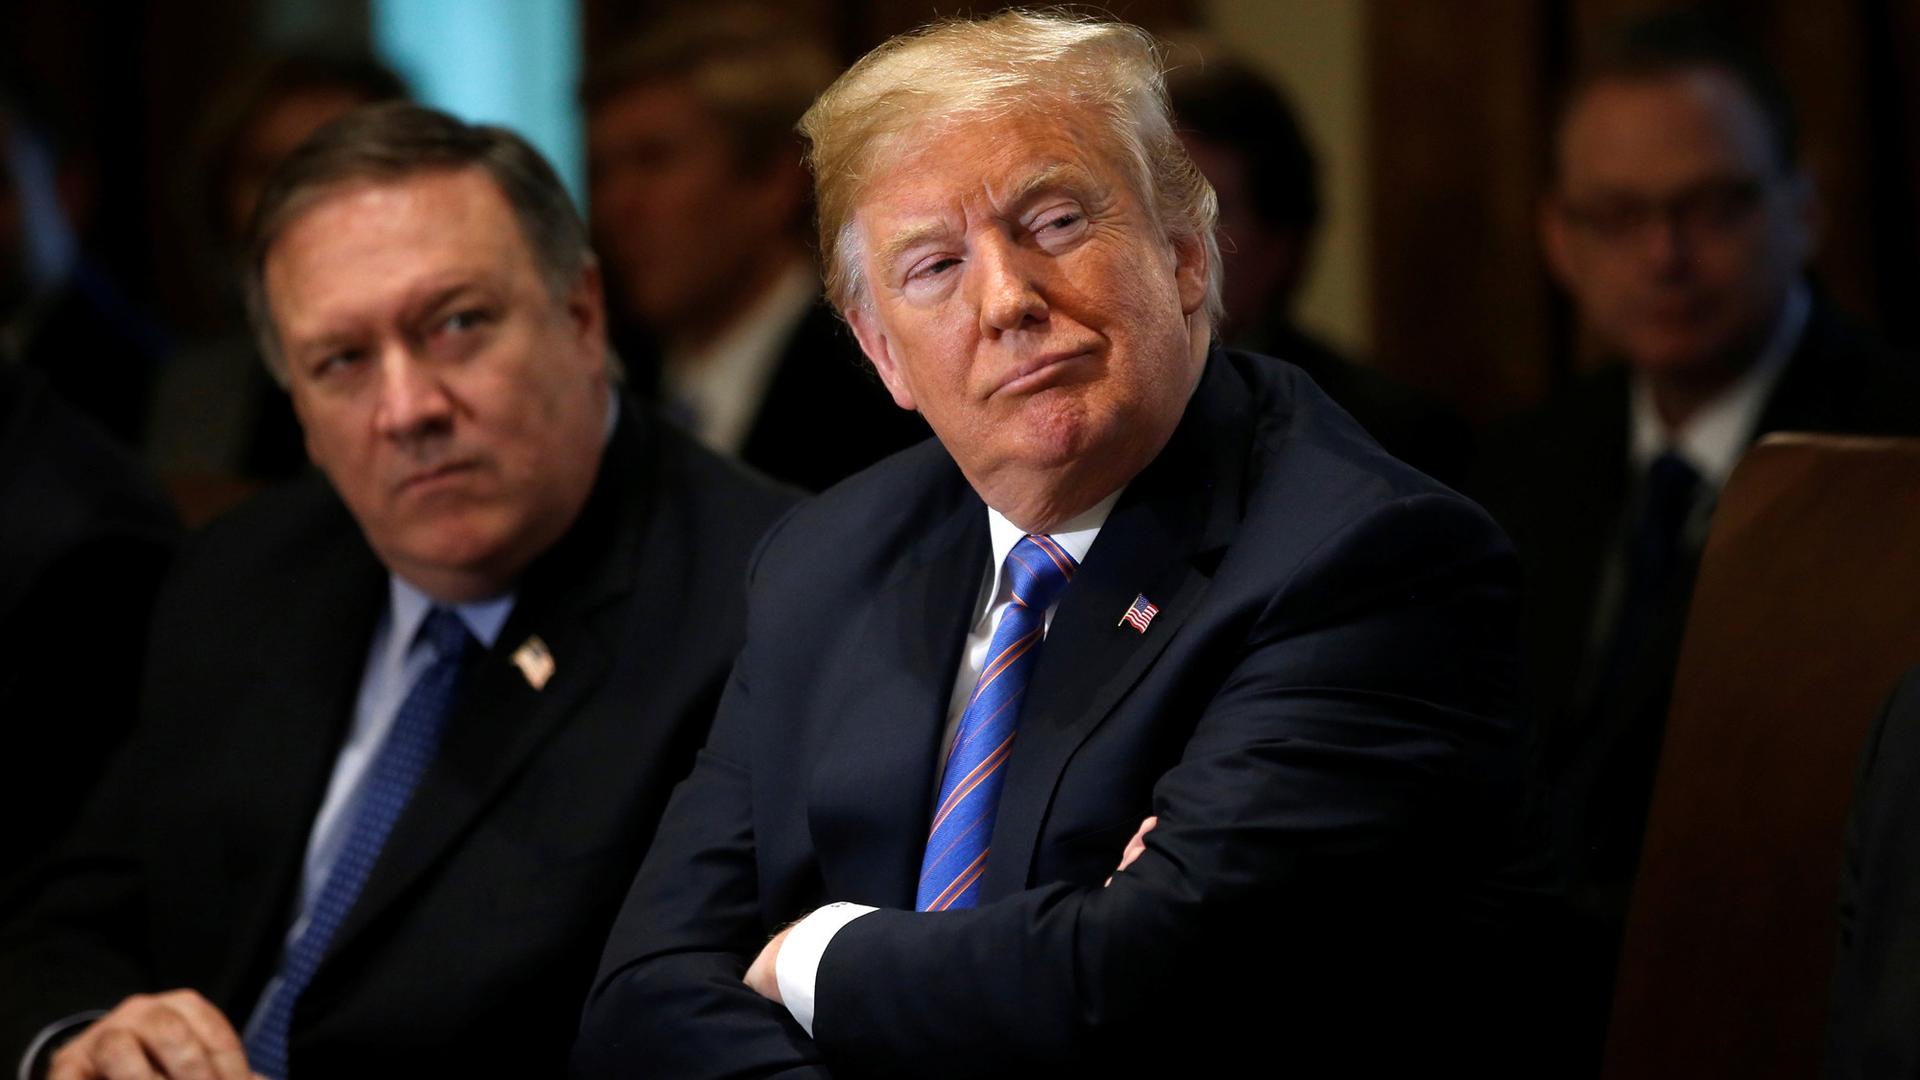 US Secretary of State Mike Pompeo is seated next to President Donald Trump who has his arms folded.